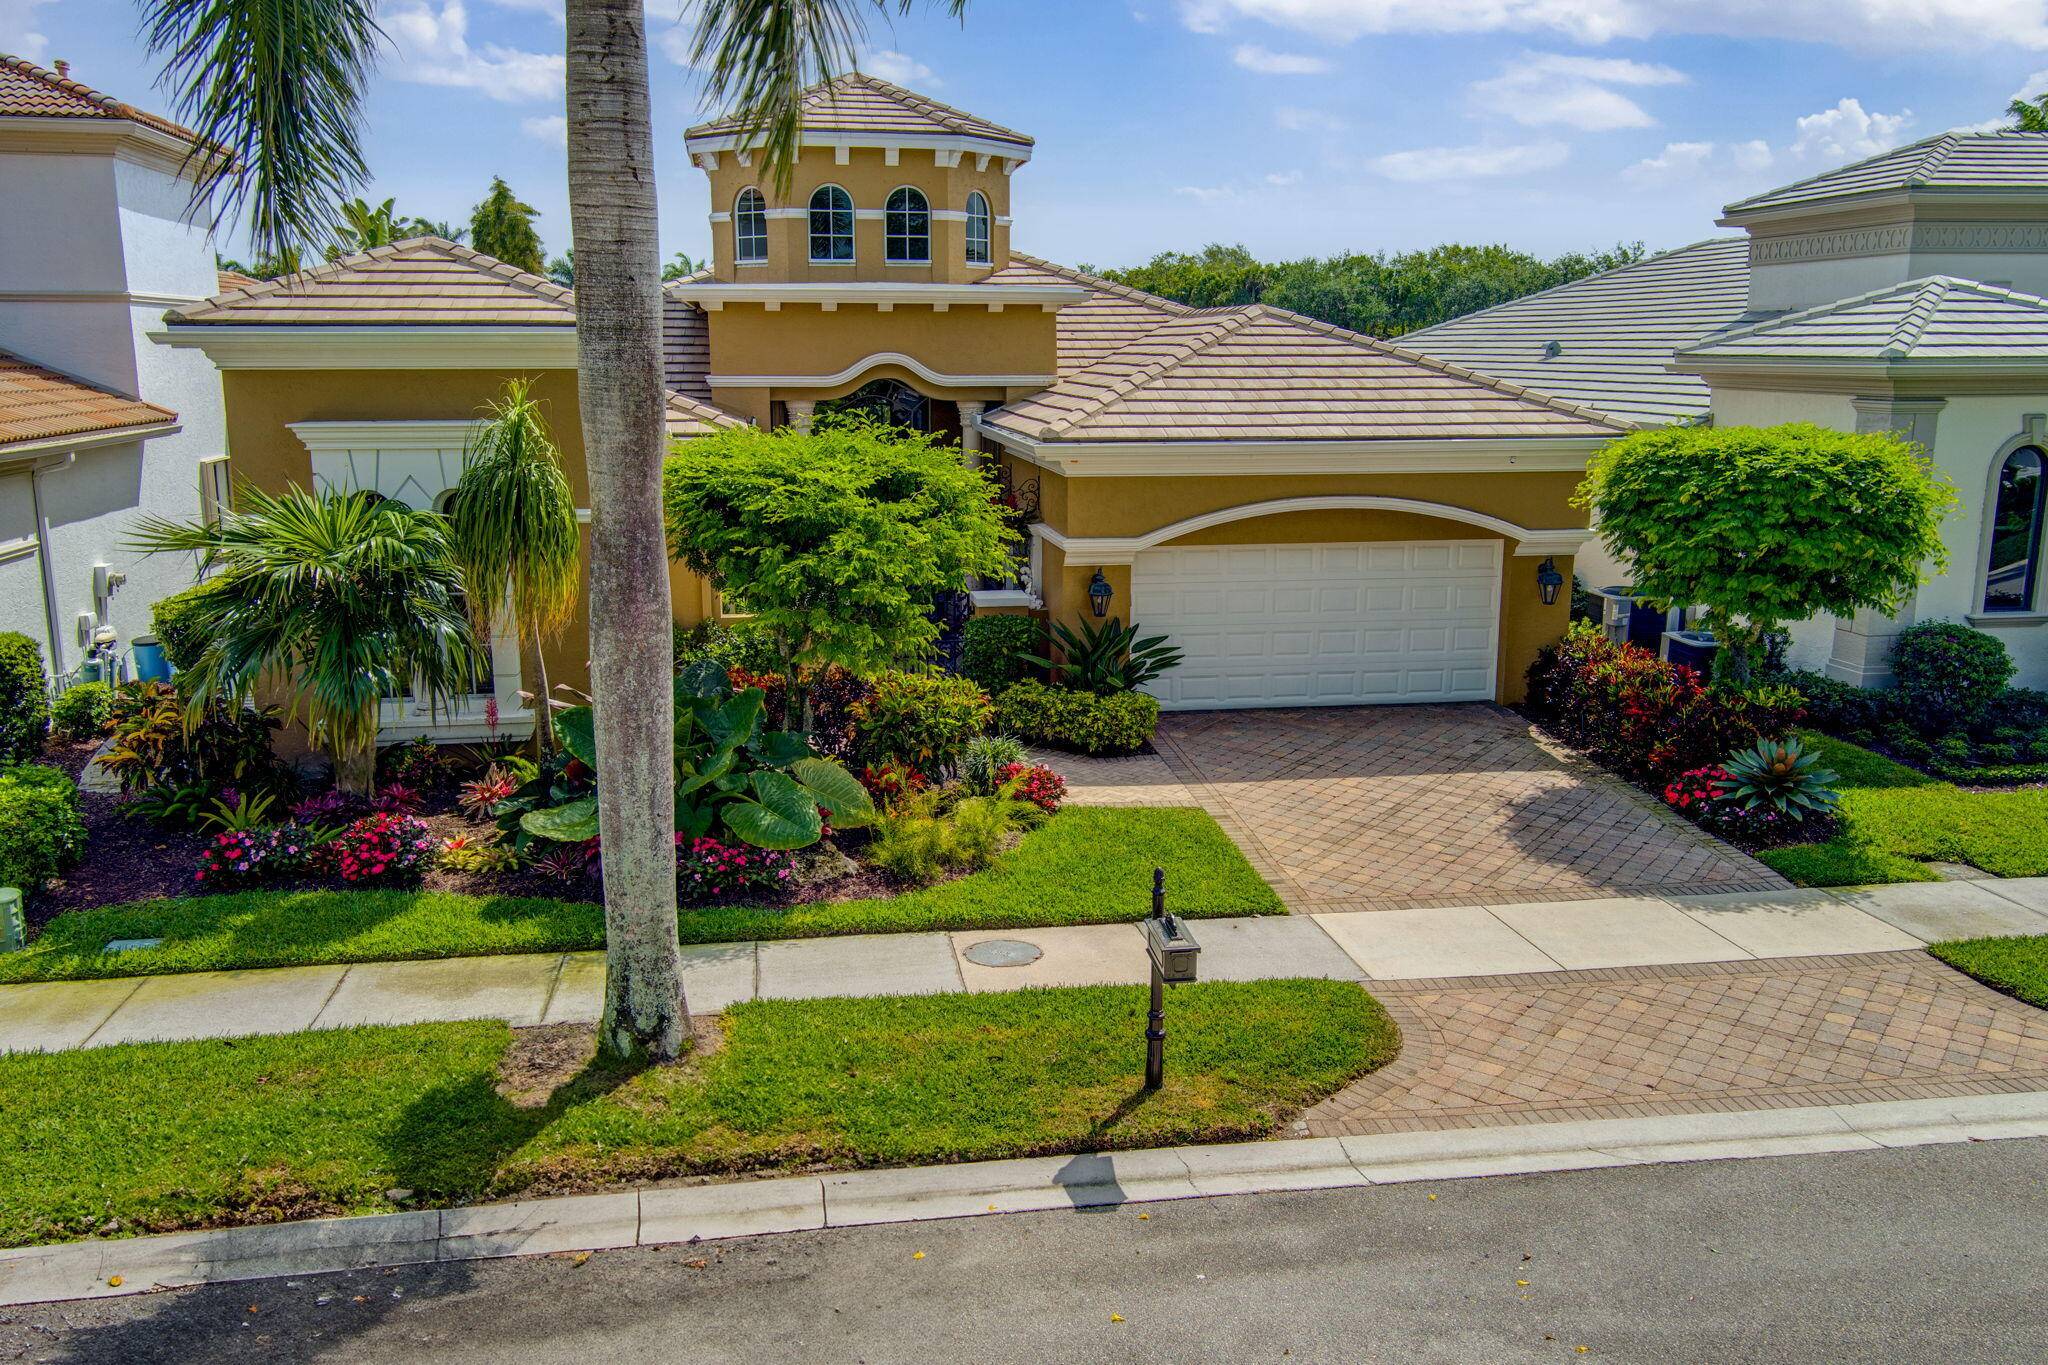 Located in the prestigious Country Club at Mirasol, this impeccably updated home boasts the finest finishes and a spacious layout.